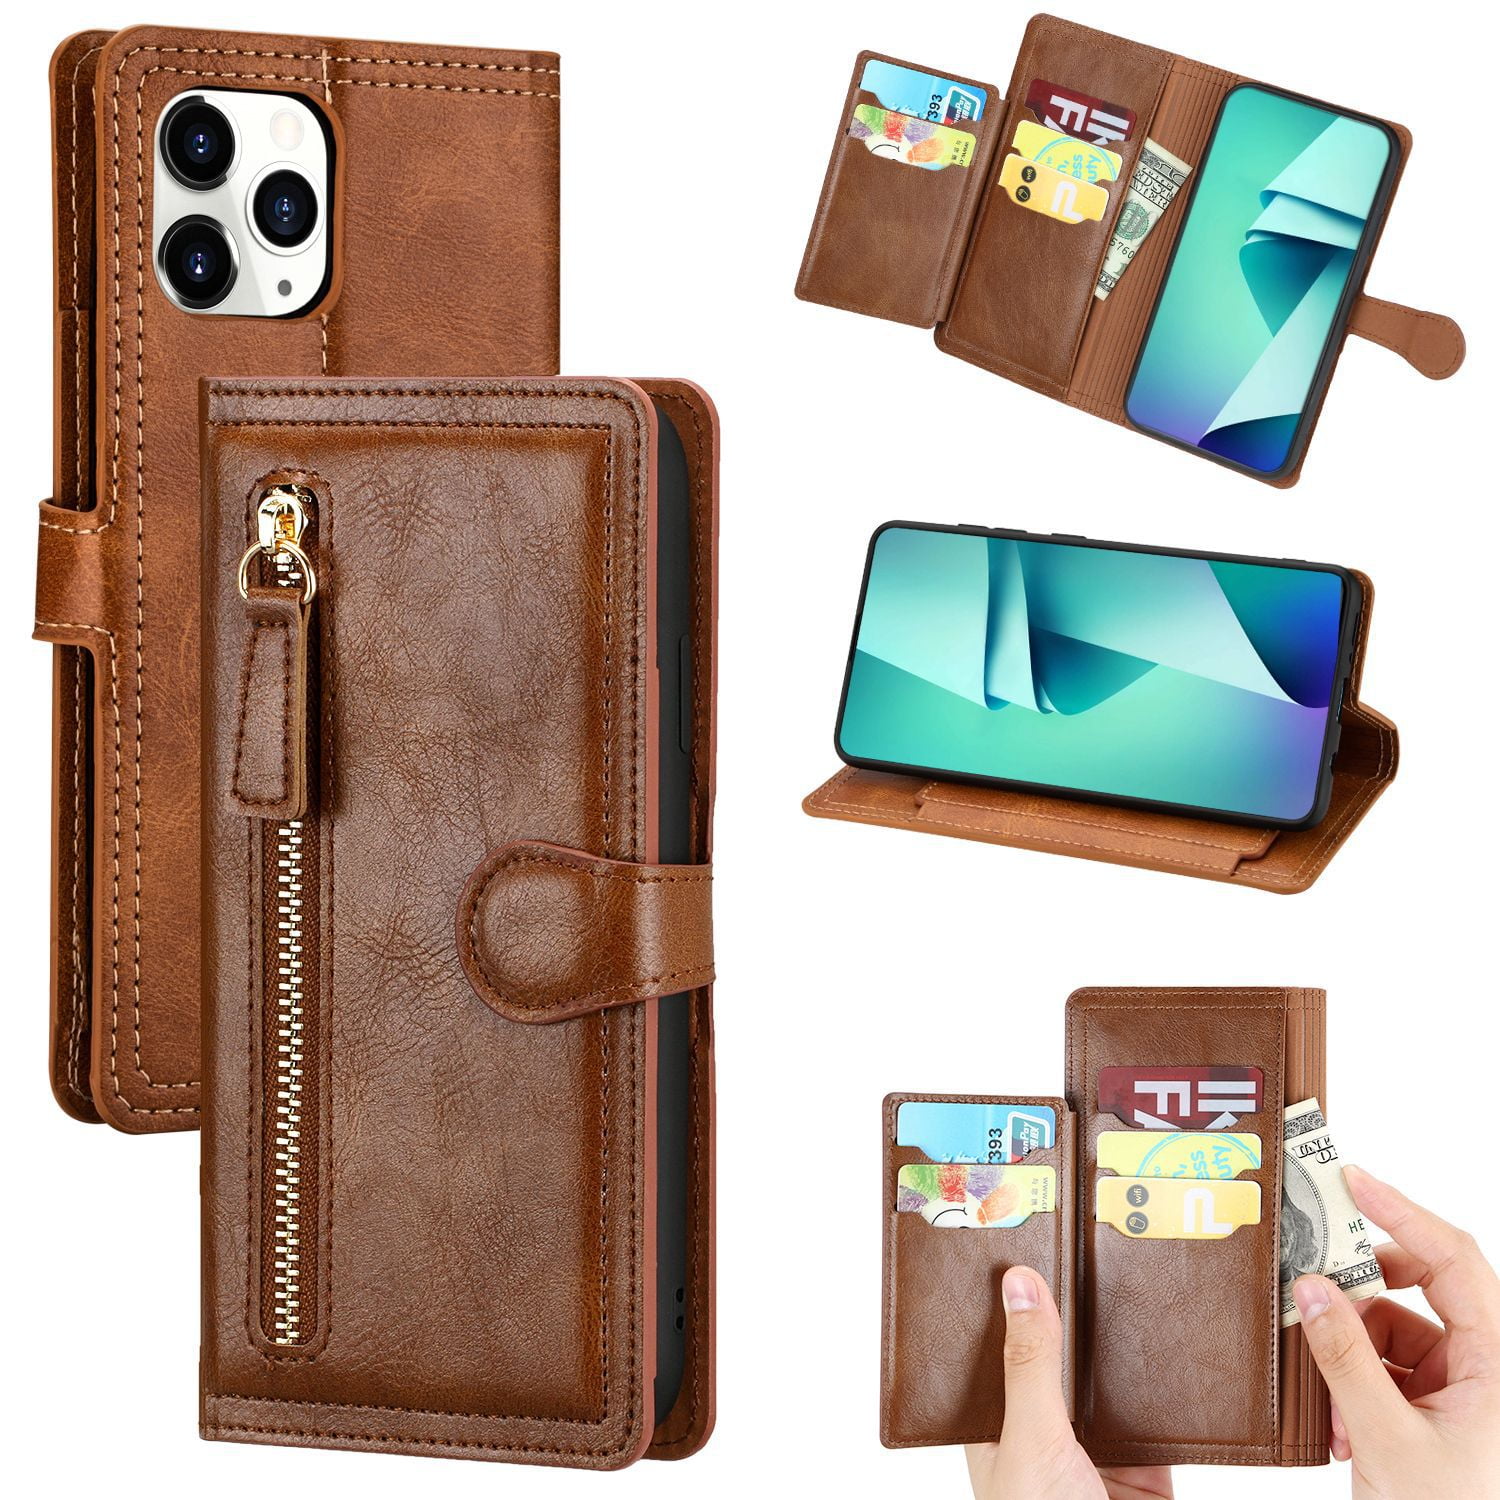 yosicl iPhone Xs Max Wallet Case, iPhone Xs Max Case Wallet Leather Zipper Folio Case with Magnetic Closure Kickstand Card Slots Case Money Pocket Flip Cover